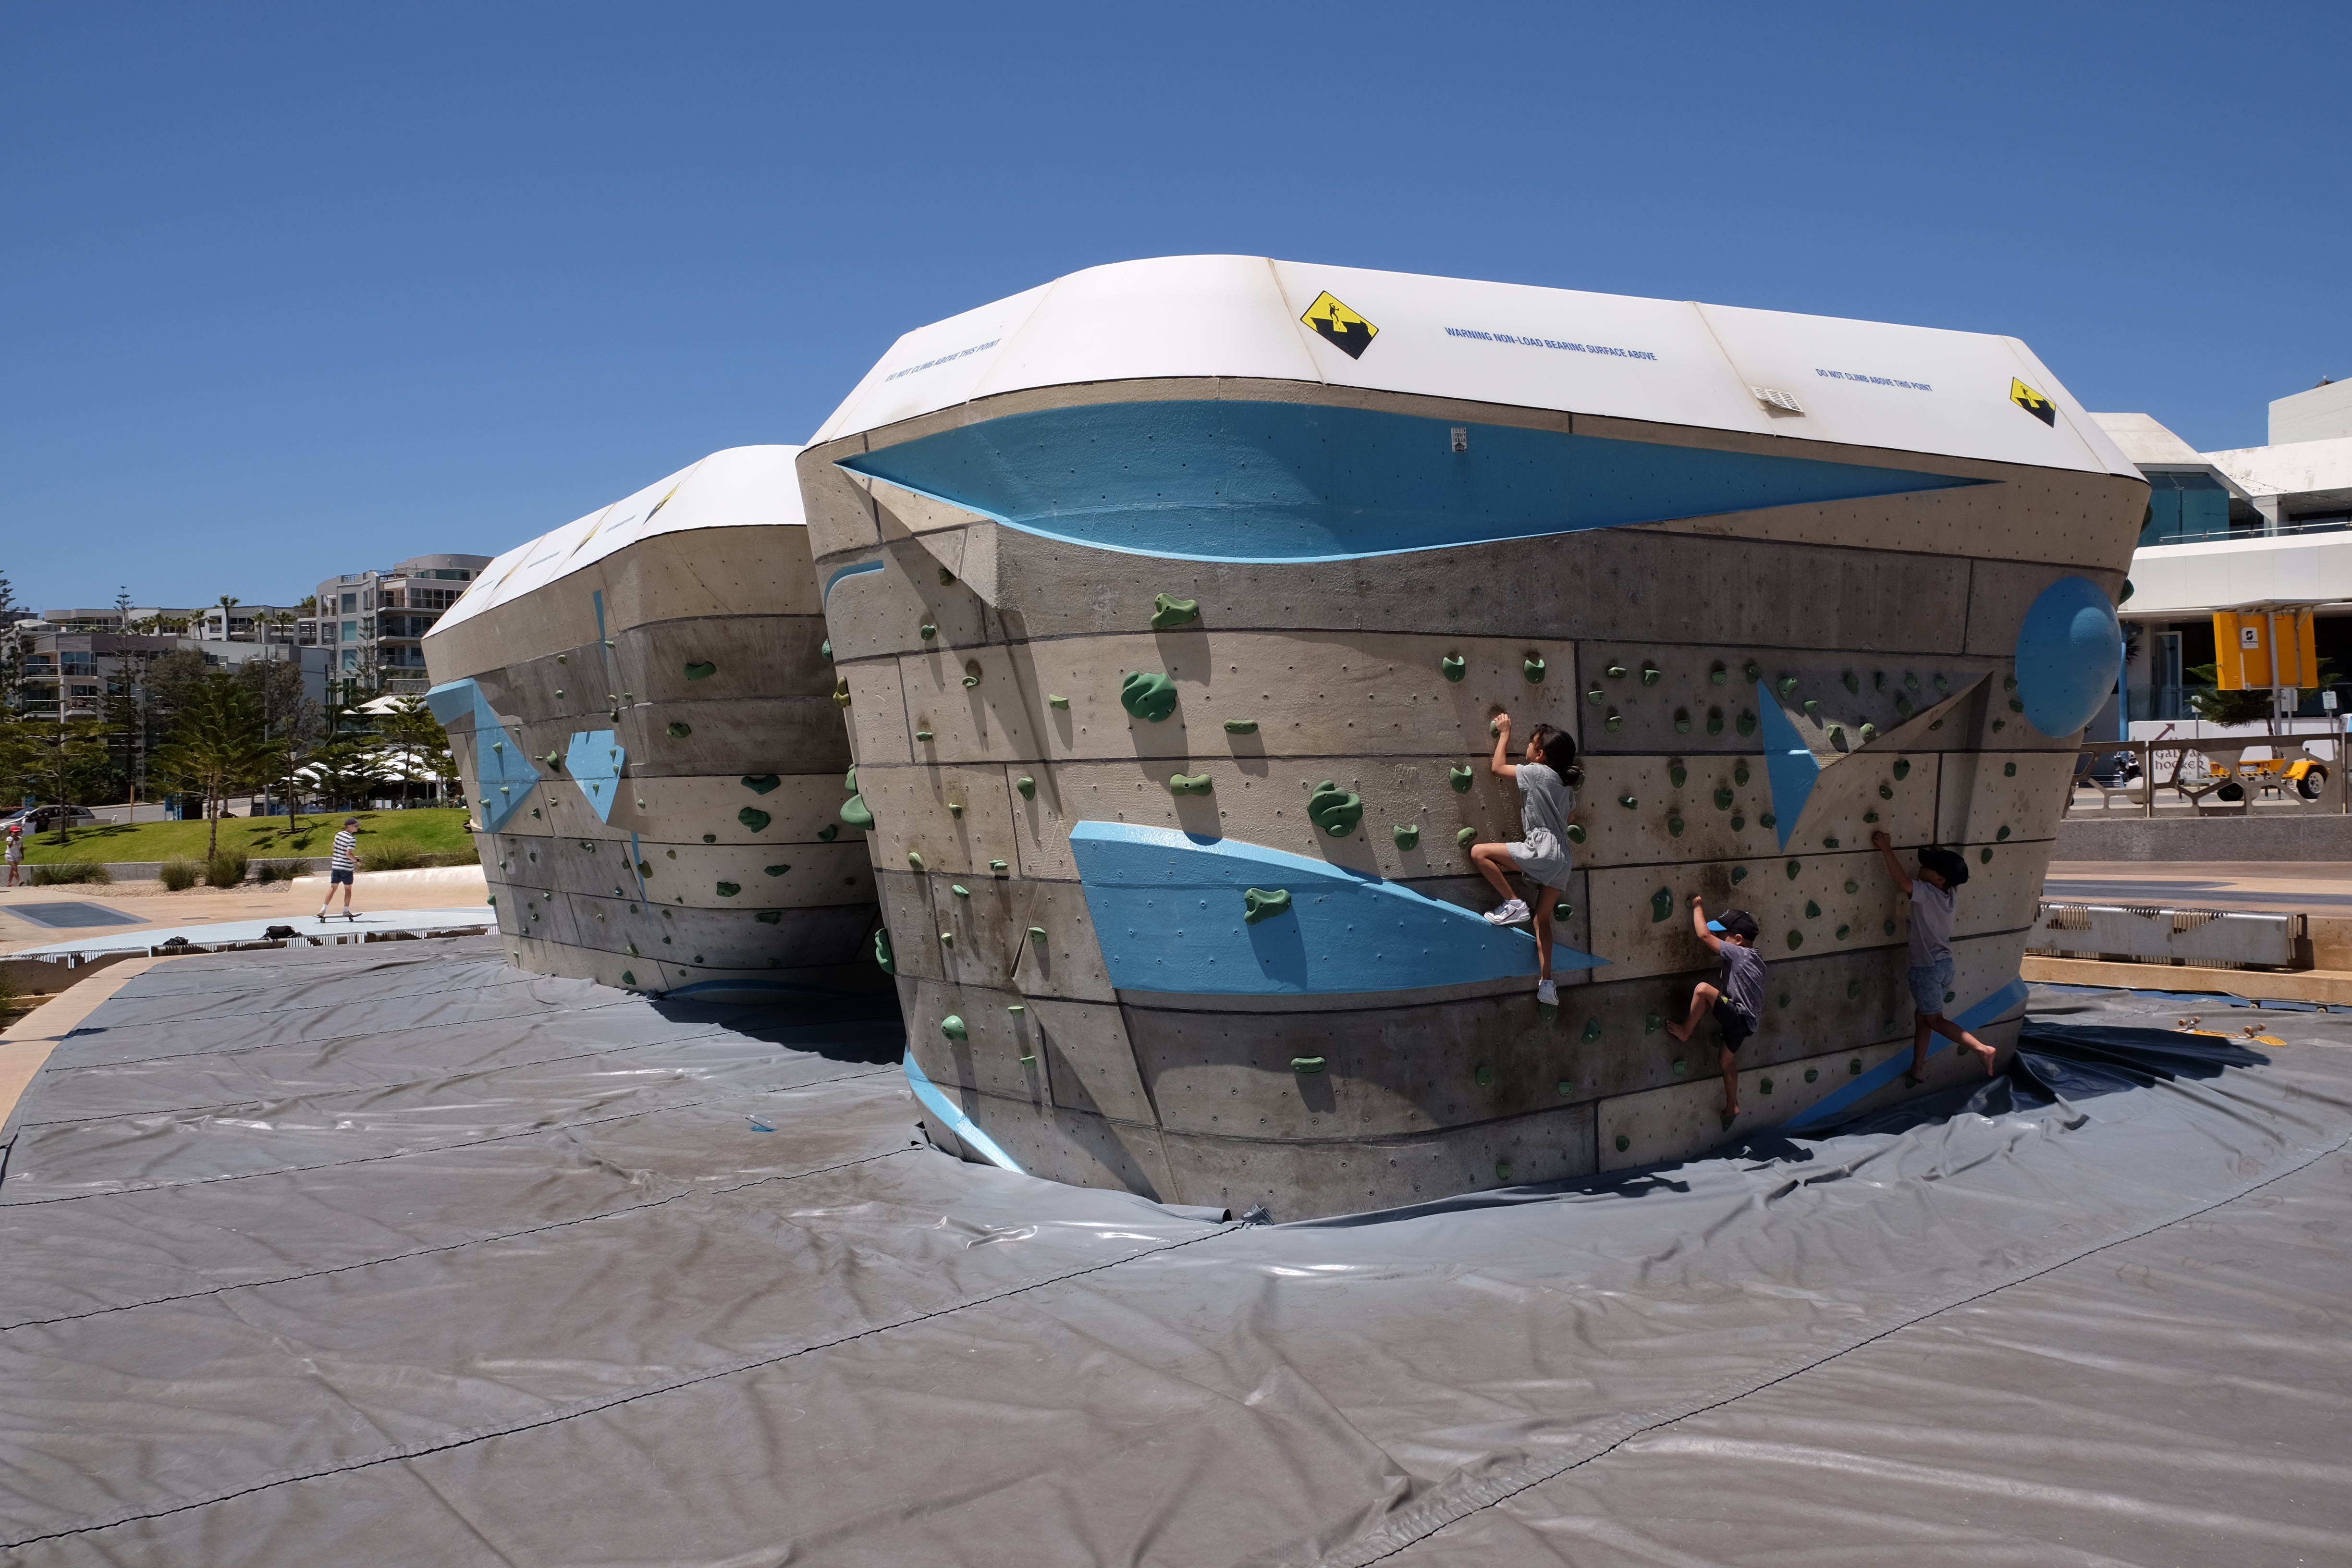 Image of a climbing wall in Scarborough, with softfall mats around the edges of the wall feature. The wall itself being a rectangular prism of approx 2m in height